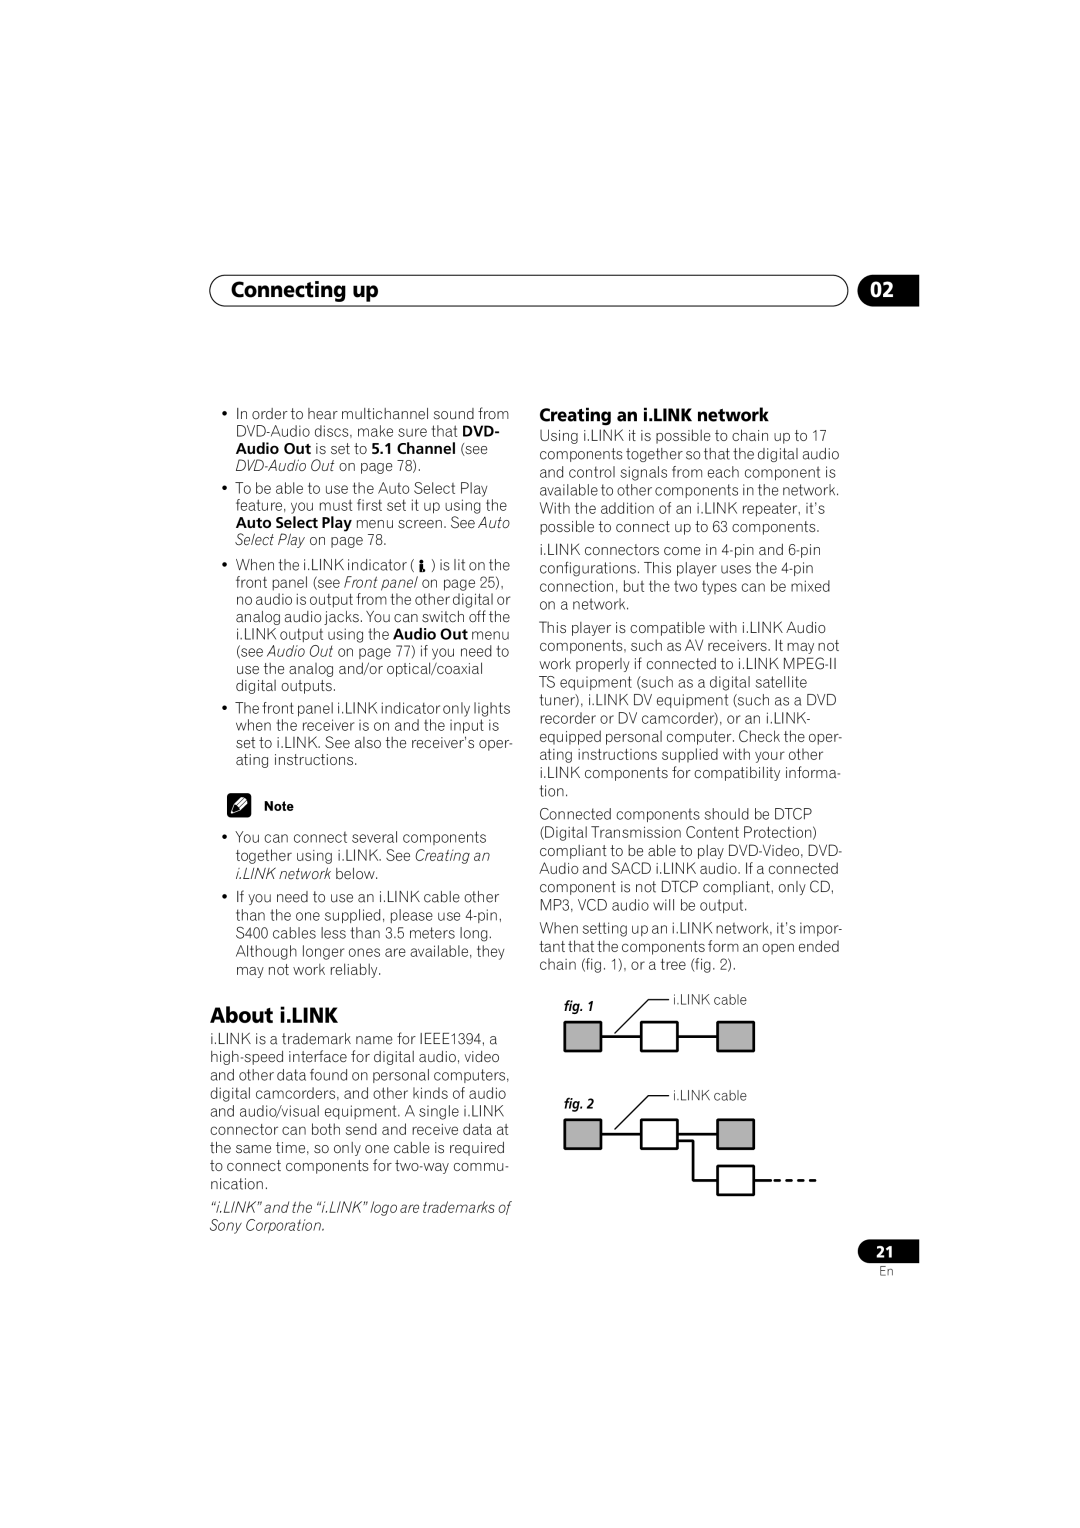 Pioneer DV-79AVi-s operating instructions About i.LINK, Creating an i.LINK network, Connecting up 